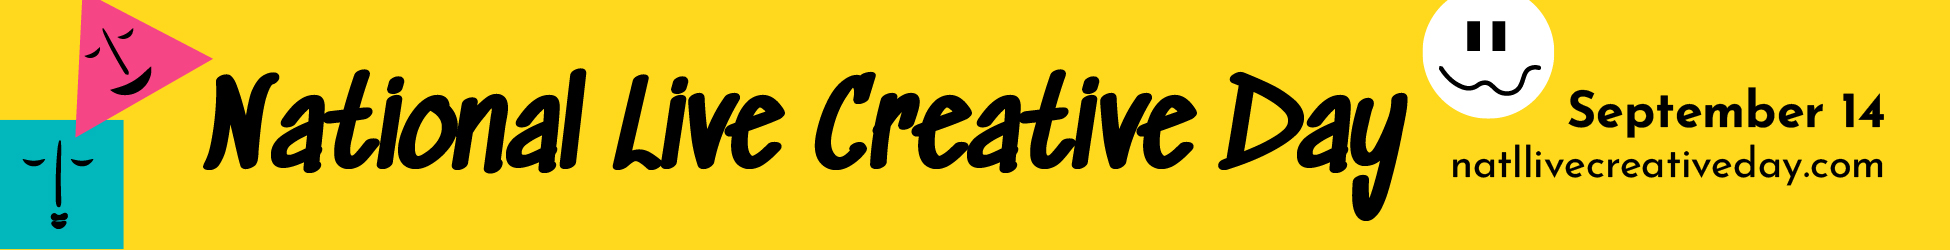 National Live Creative Day Website Banner